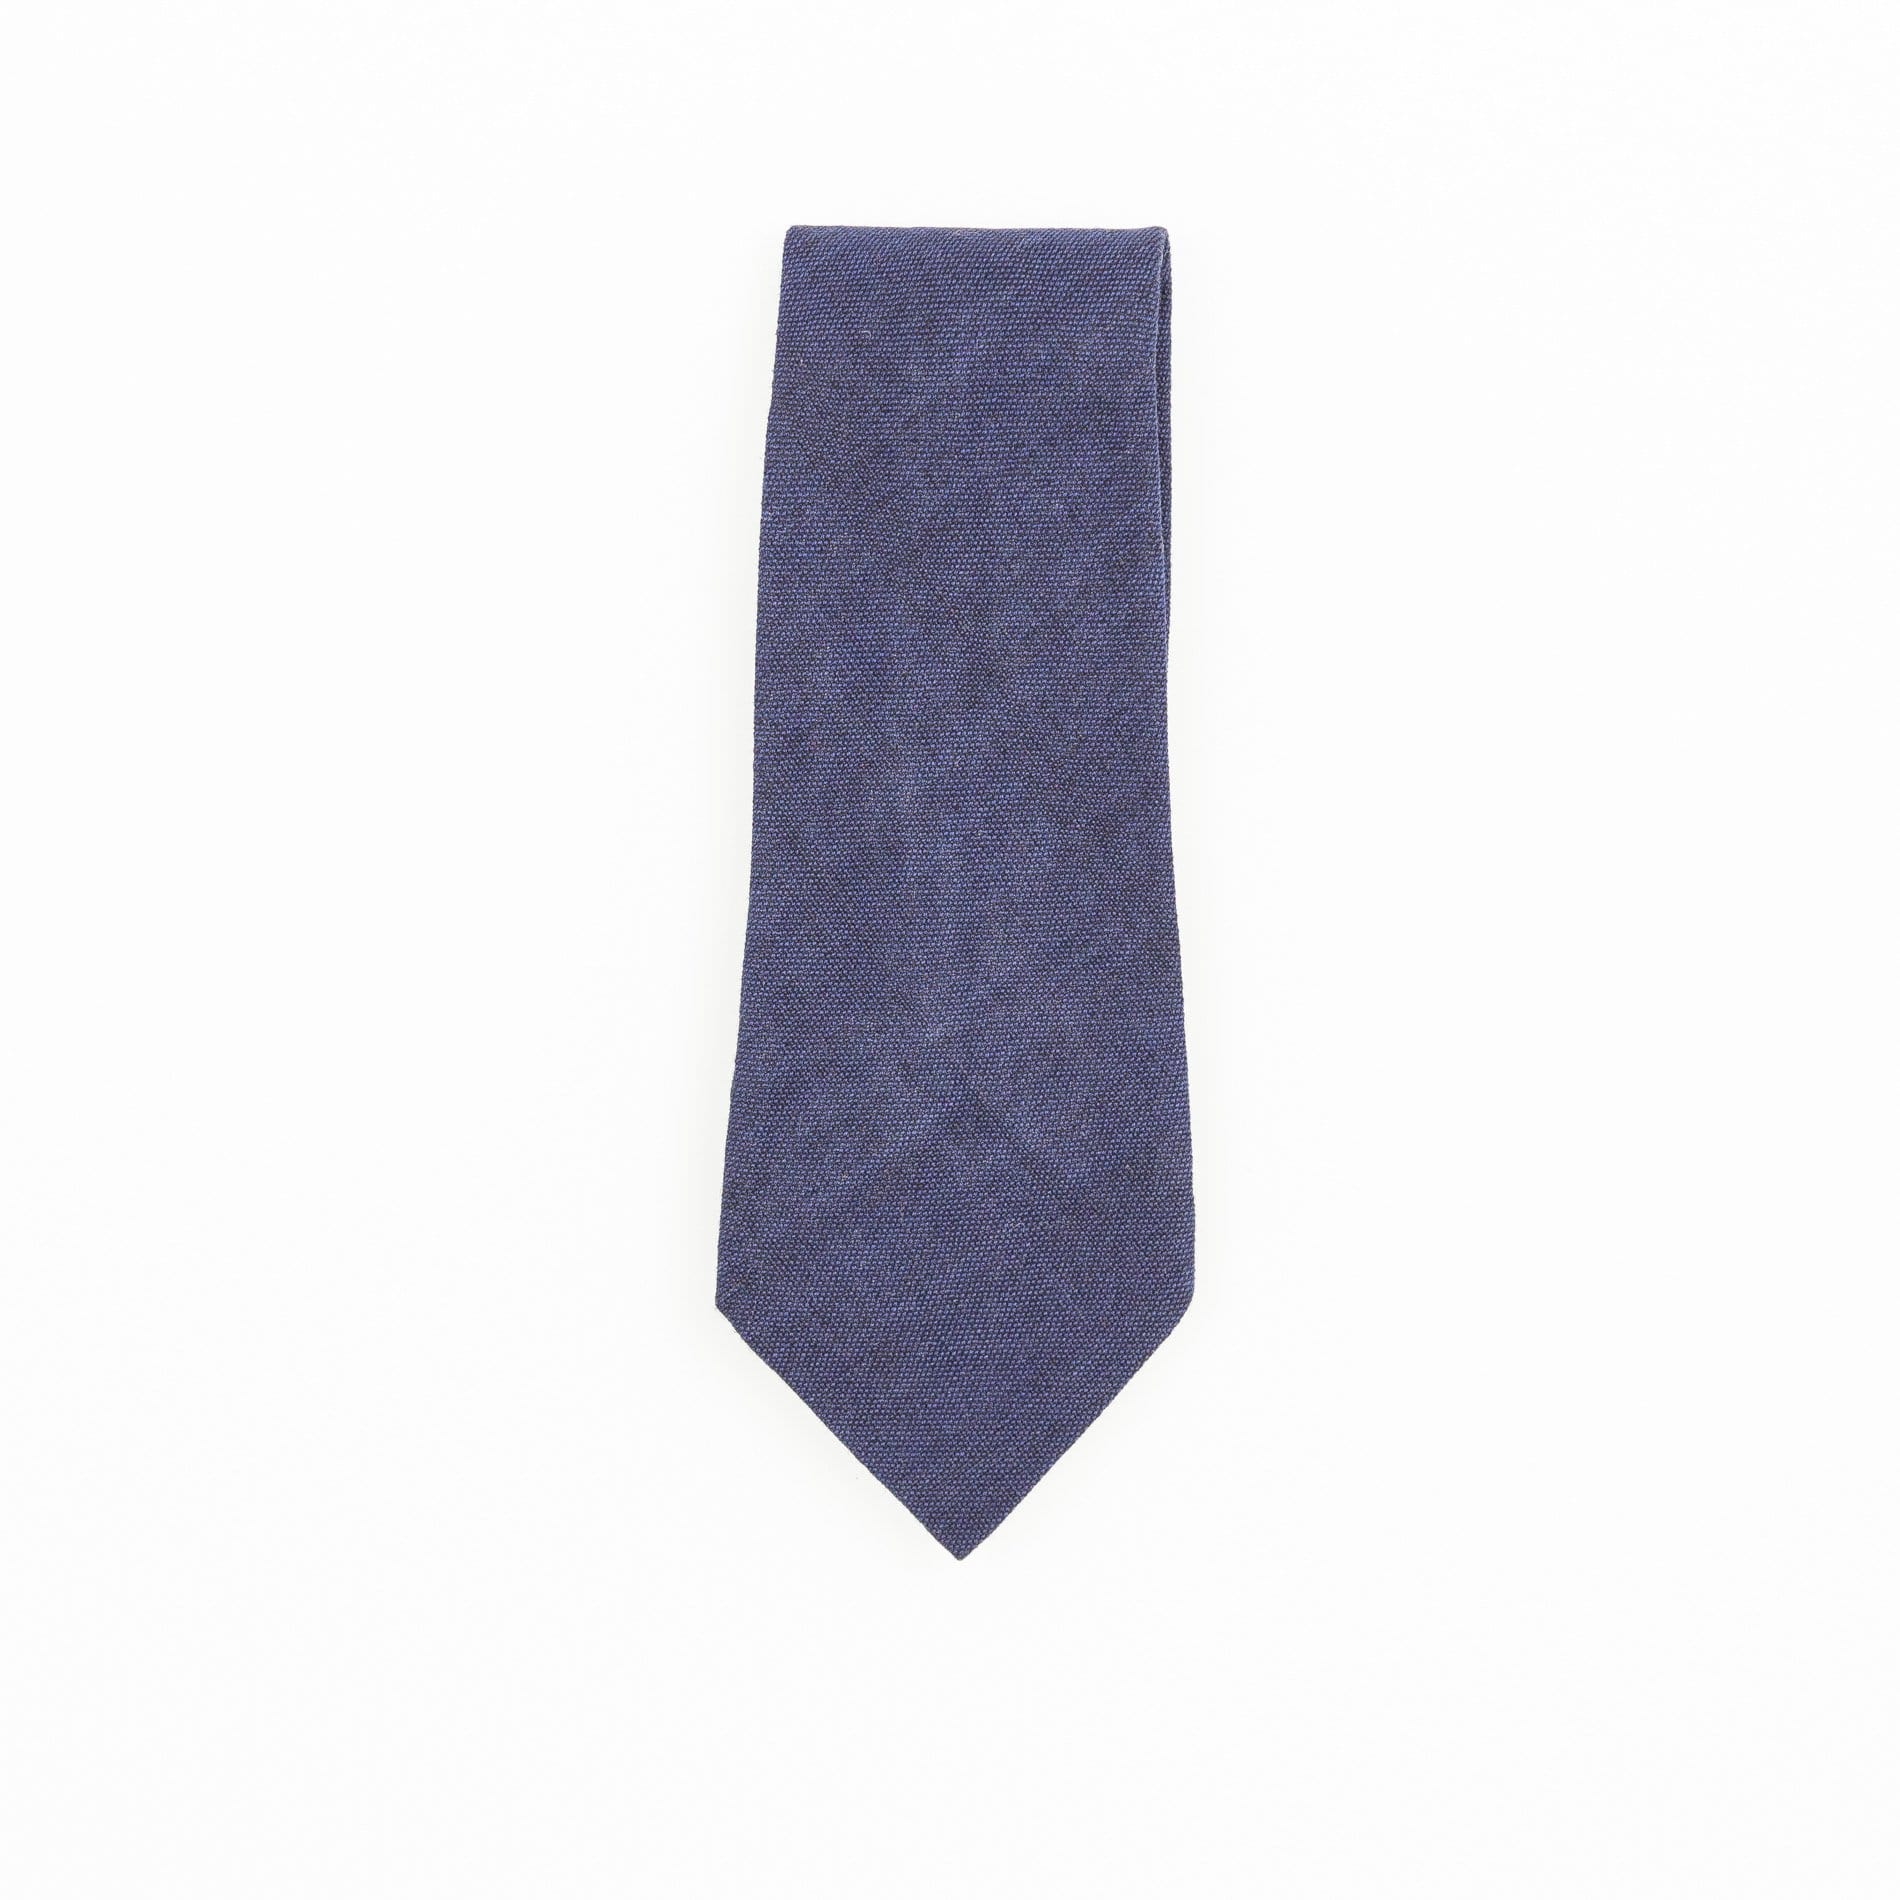 Grey Solid Guatemalan Cotton Tie - Handmade, eco-friendly & Women owned business